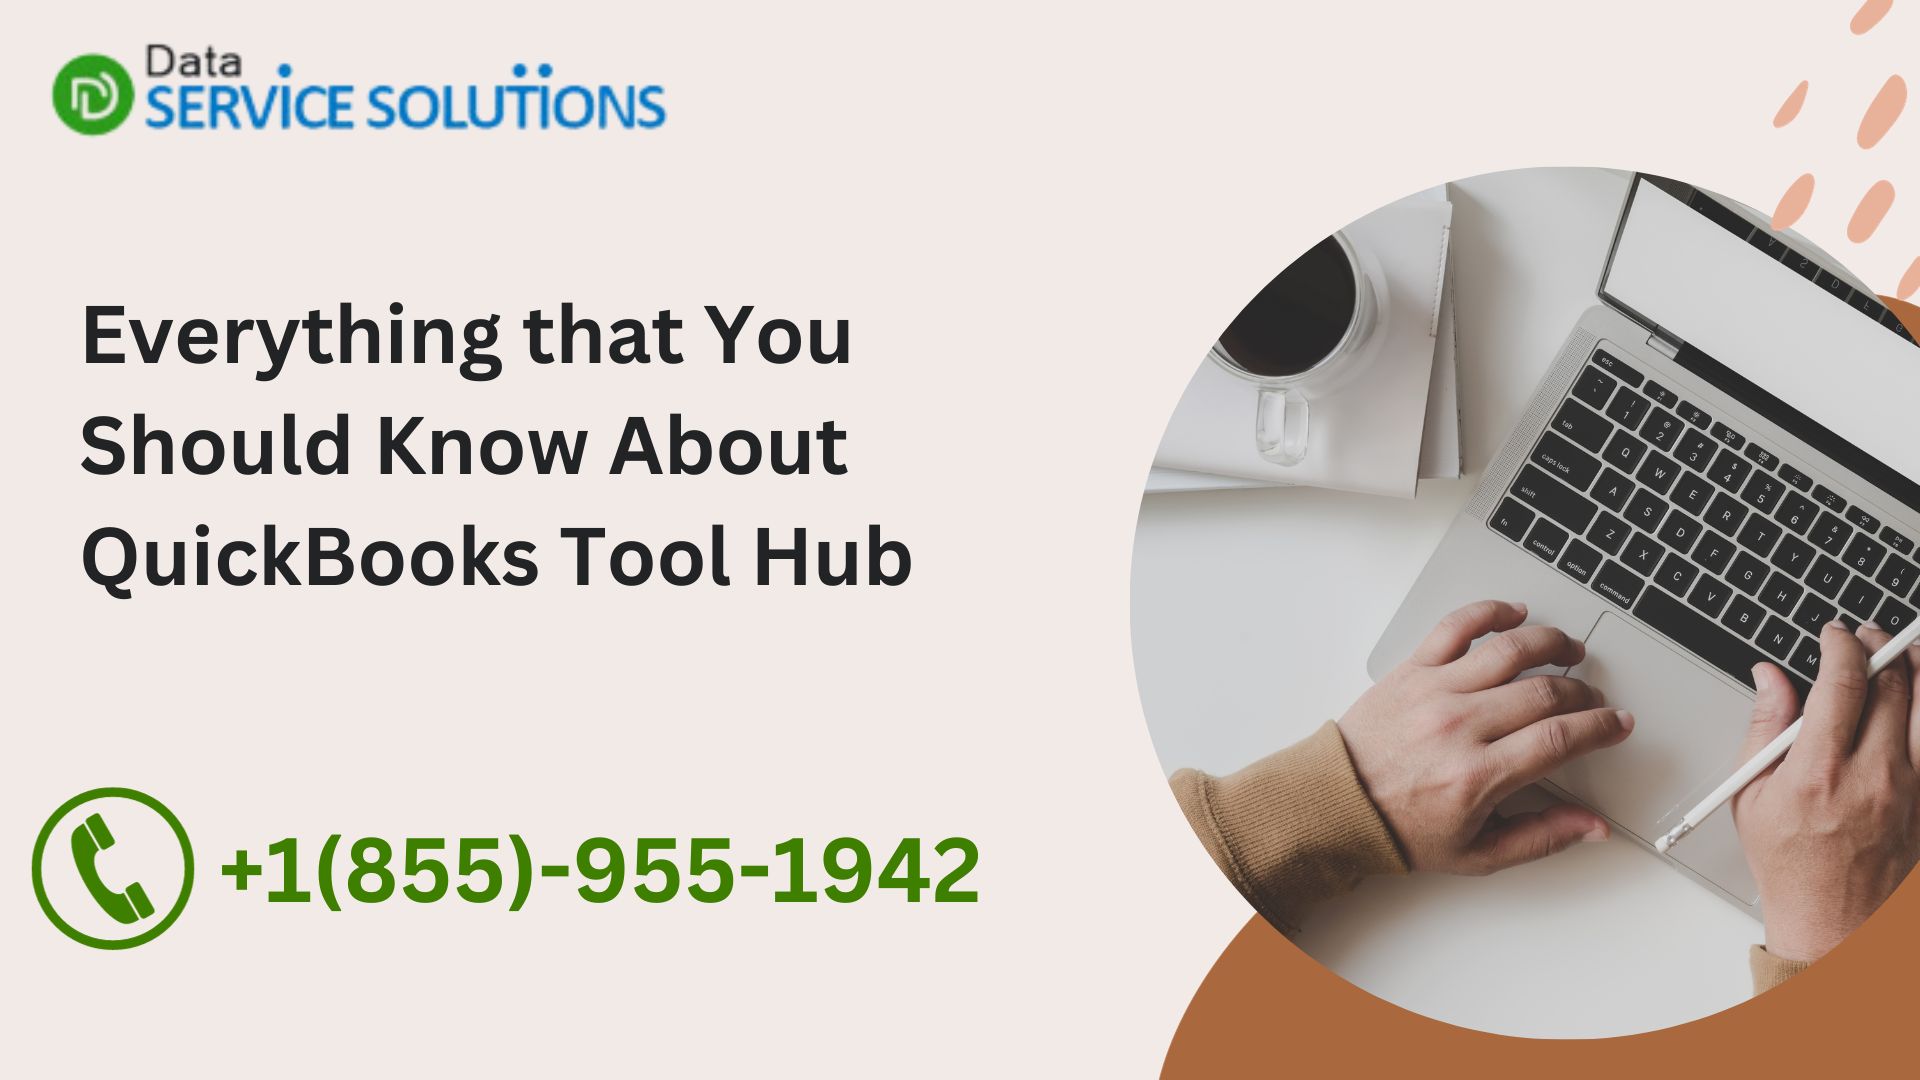 Everything that You Should Know About QuickBooks Tool Hub